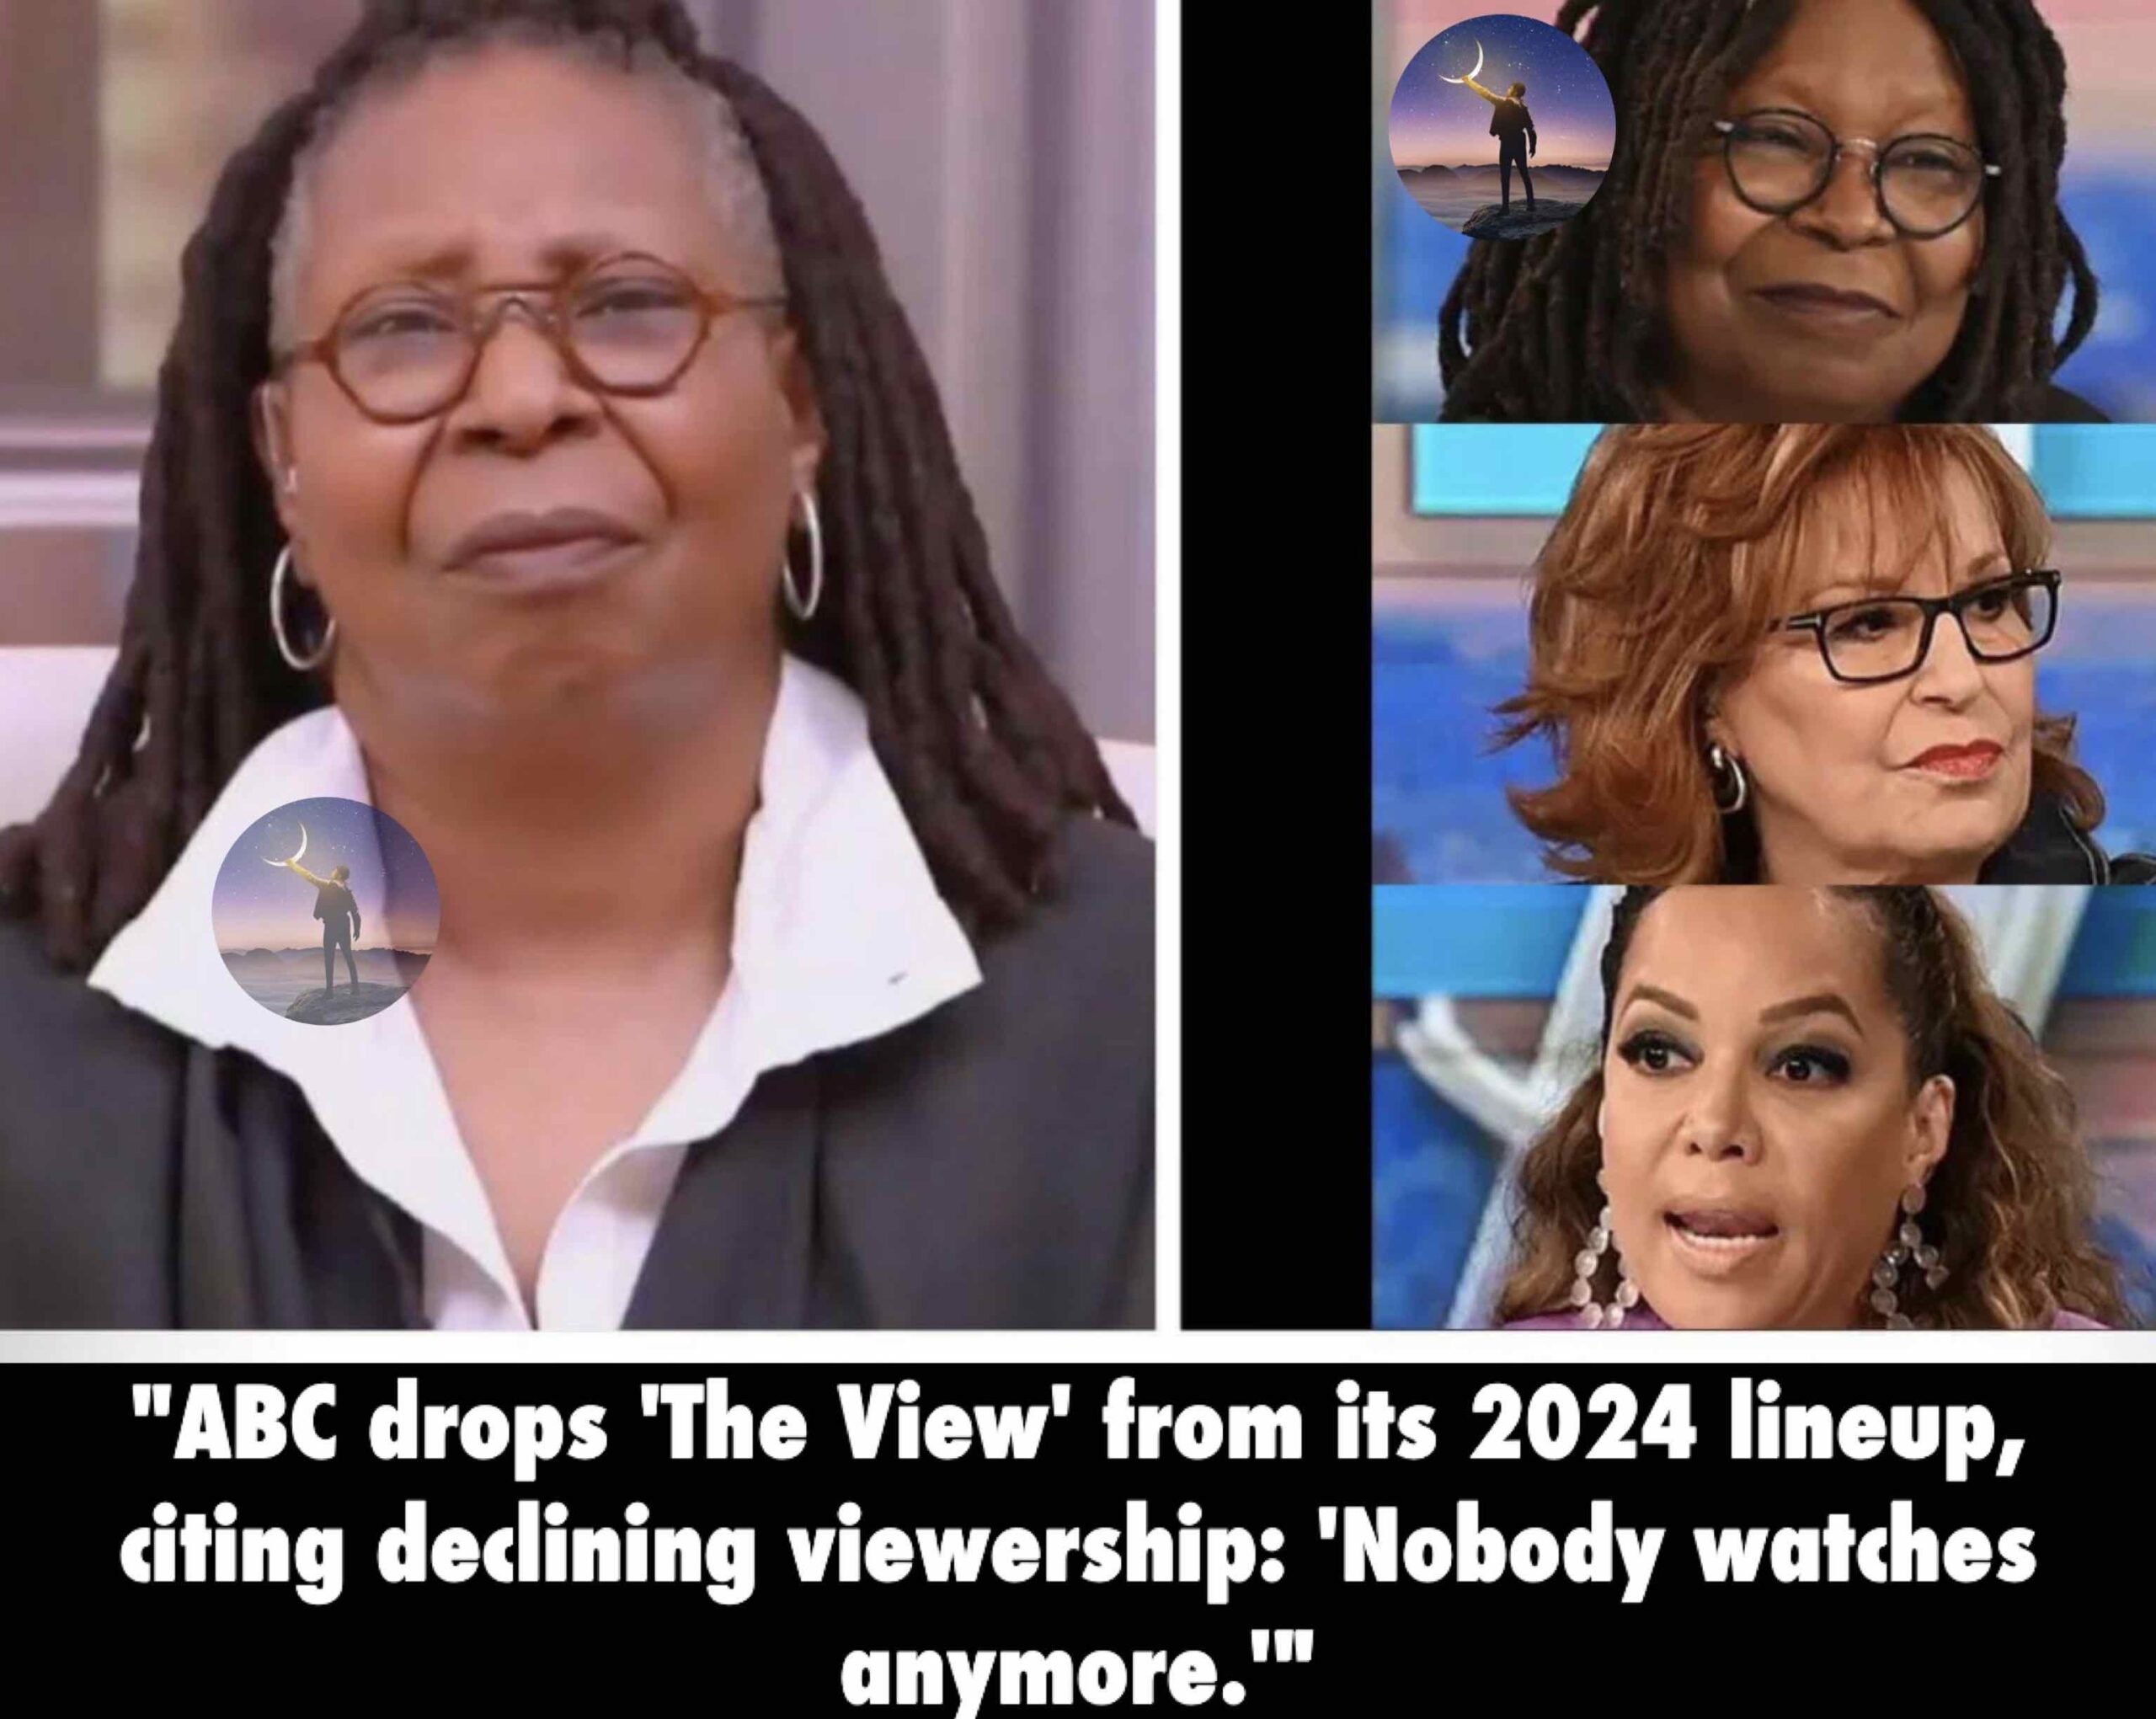 “ABC drops ‘The View’ from its 2024 lineup, citing declining viewership: ‘Nobody watches anymore.'”